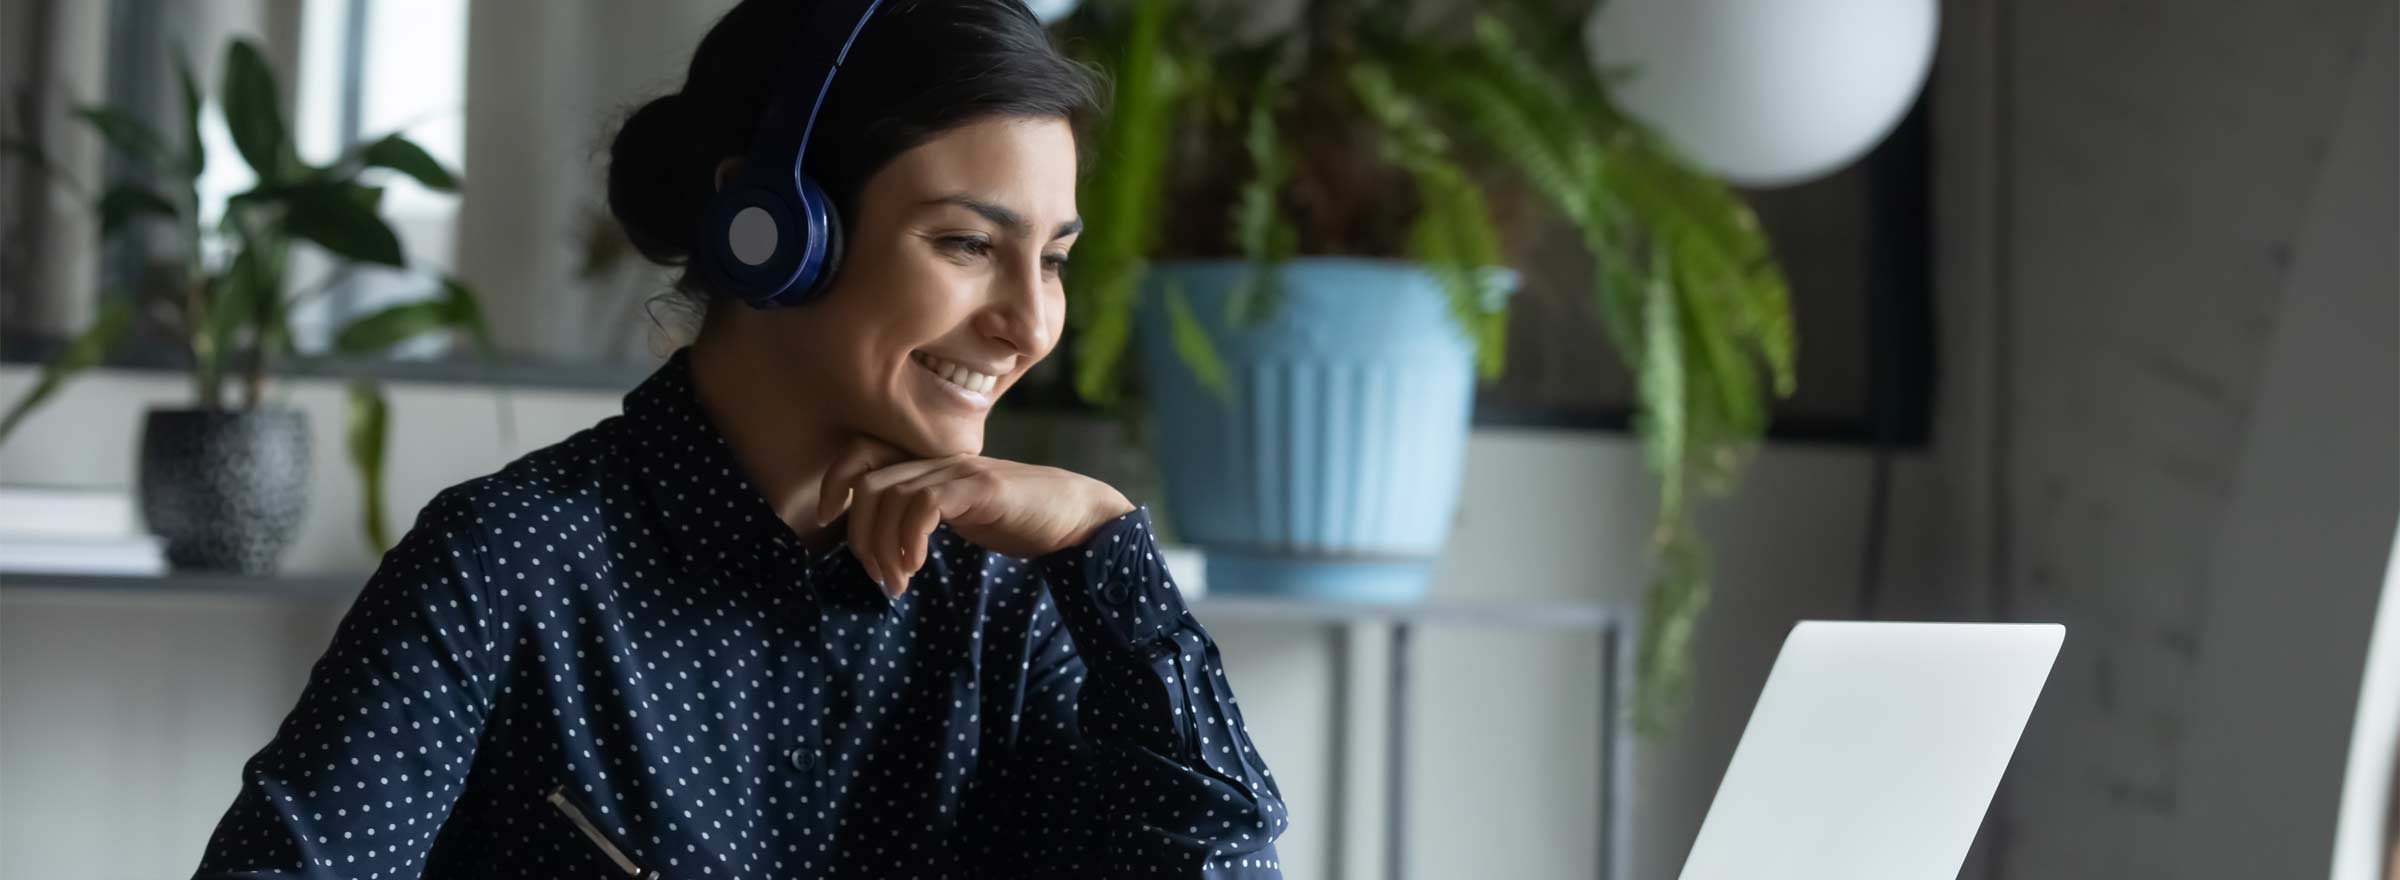 woman with headphones smiling at a computer